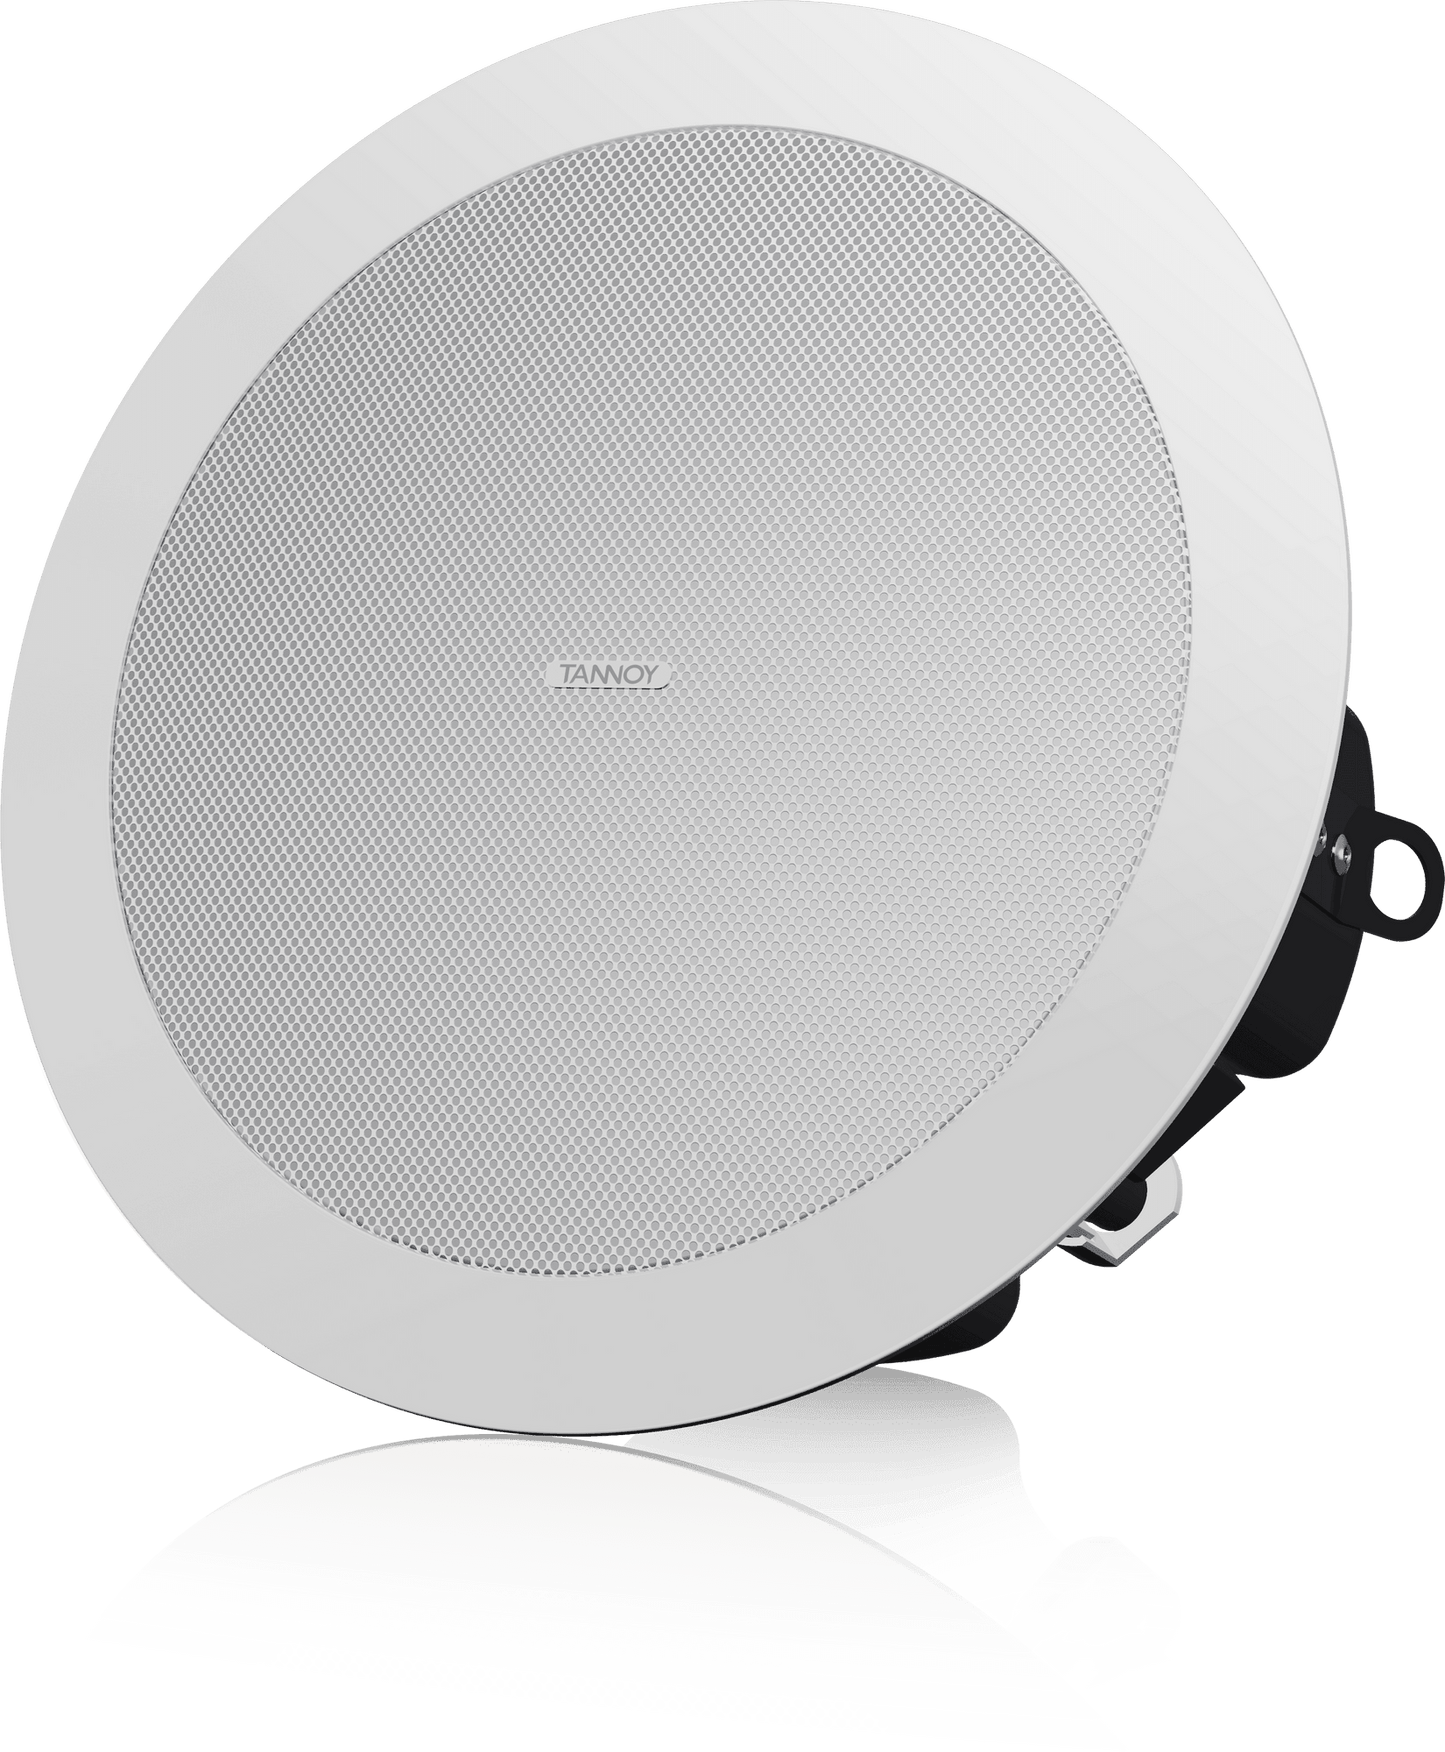 Tannoy CVS 4 MICRO (EN 54) 4 Coaxial In-Ceiling Loudspeaker with Shallow Back Can EN54-Certified